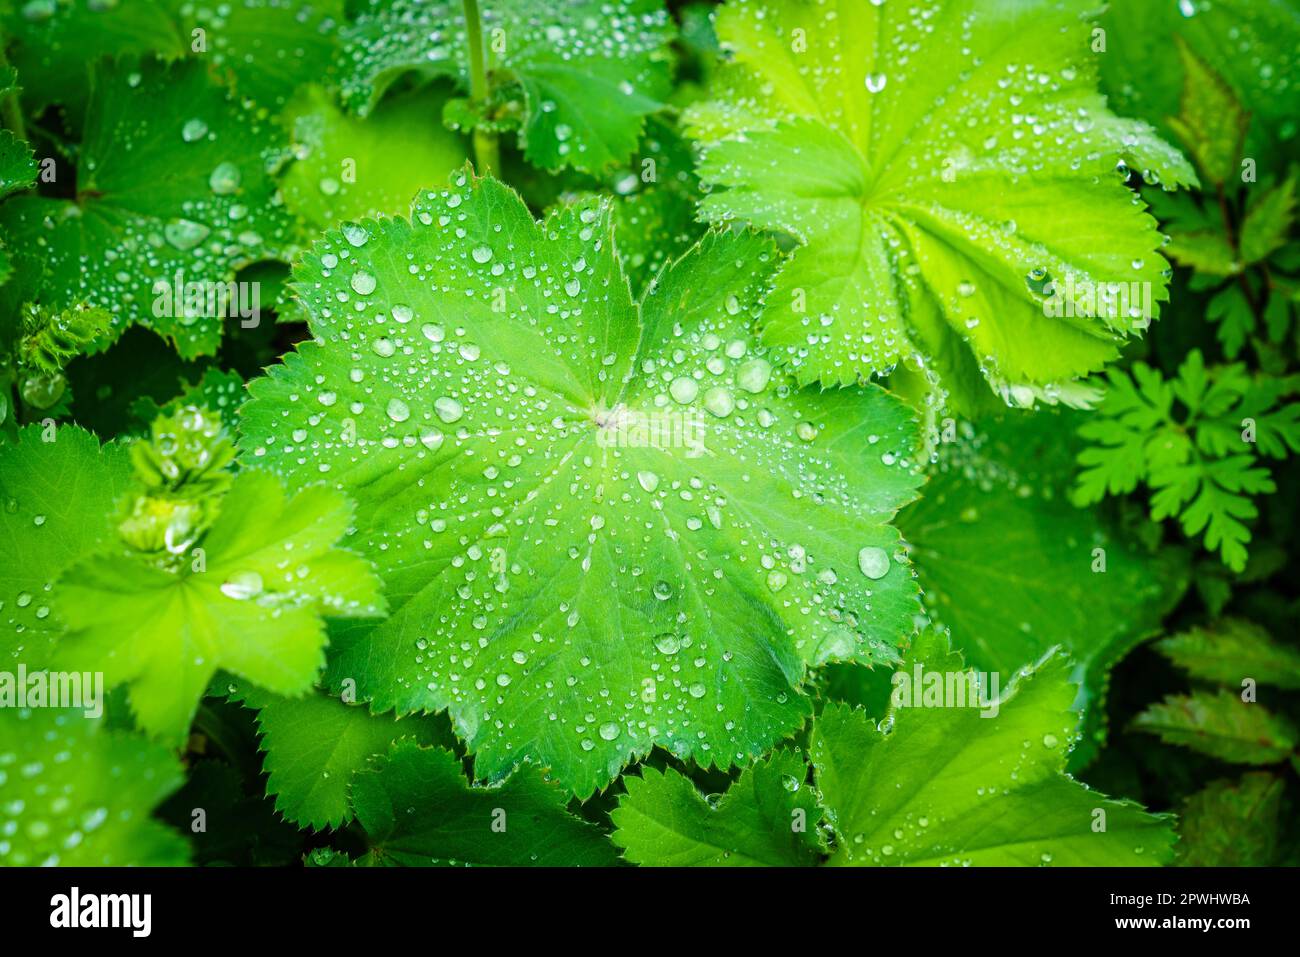 Close-up image of fresh green Ladys Mantle (Alchemilla vulgaris) leaves covered in dew droplets Stock Photo